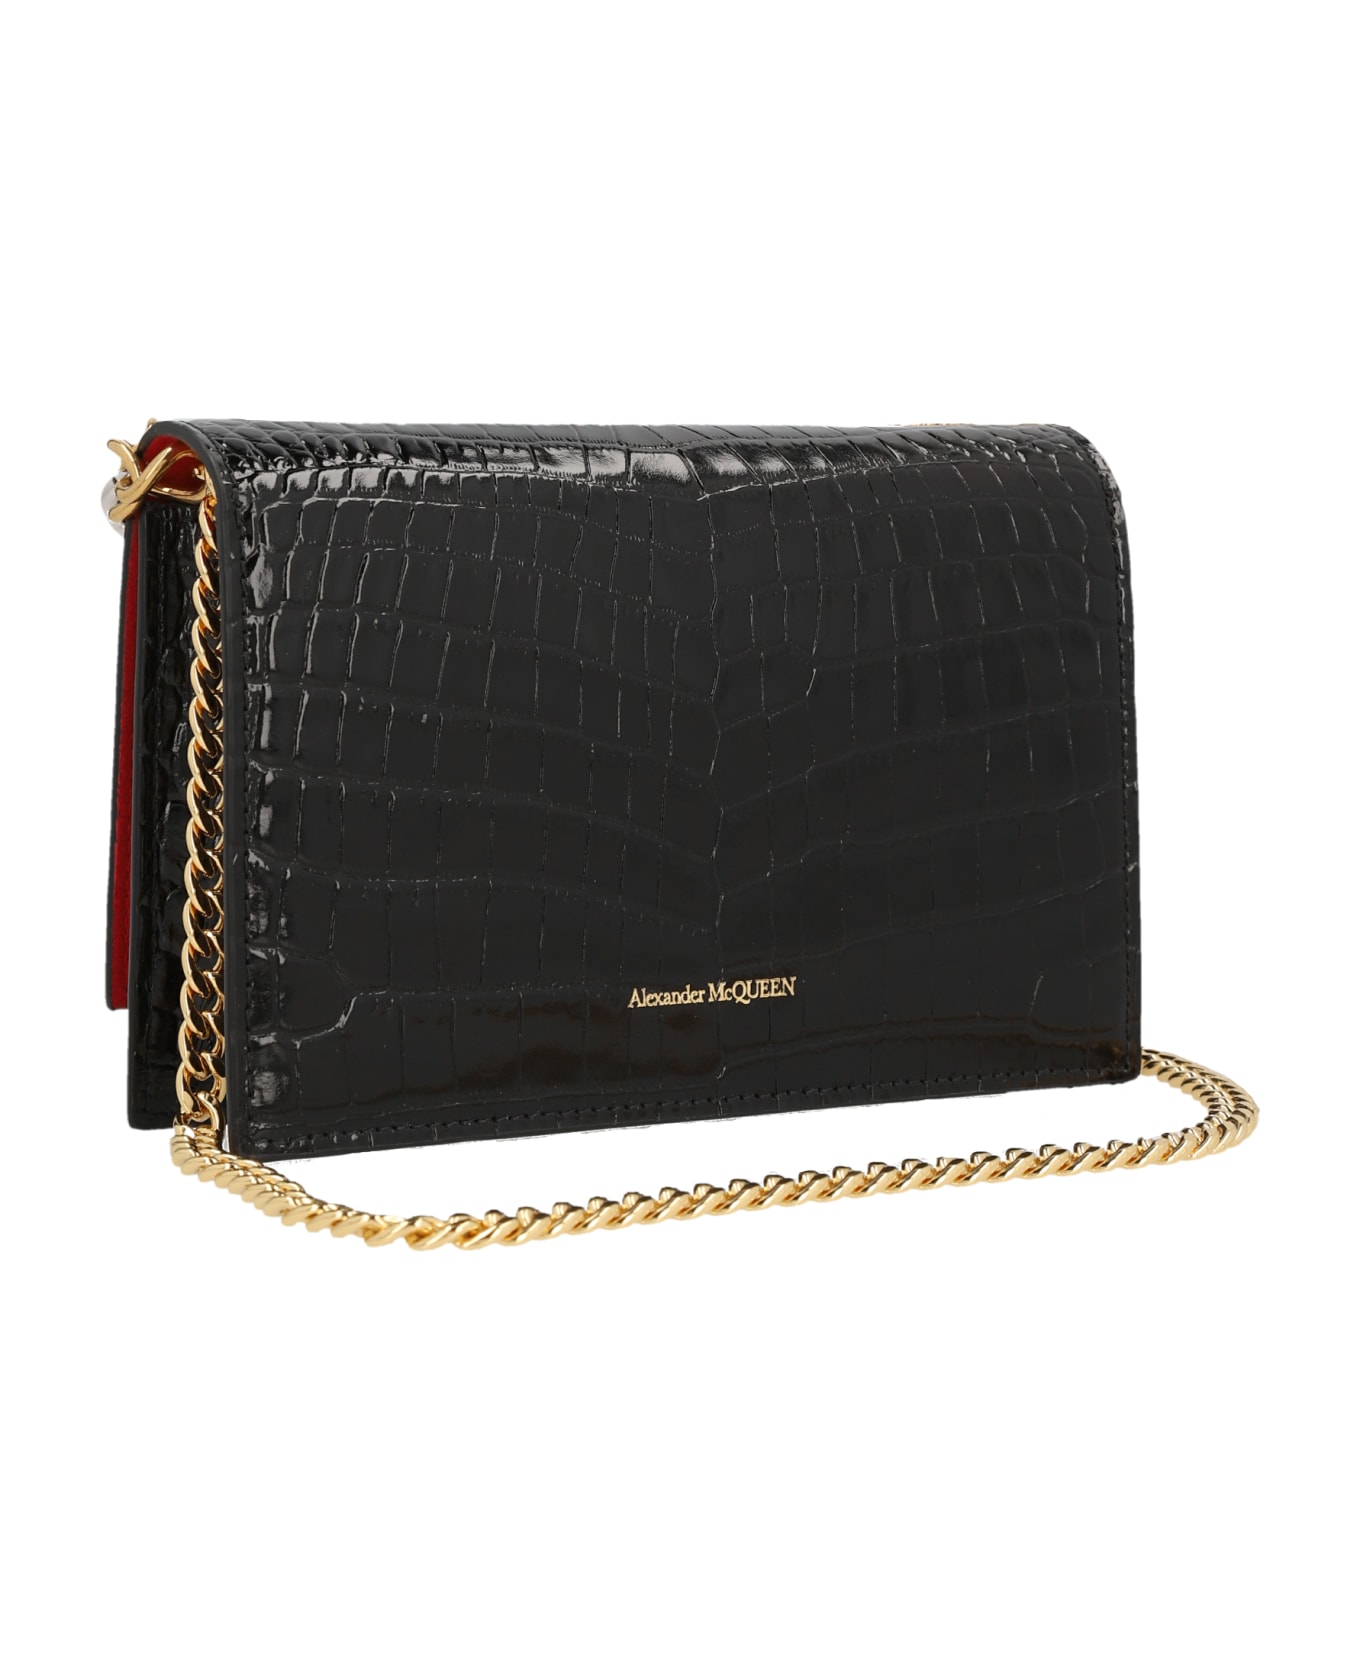 Alexander McQueen Black Small Skull Bag With Chain - Black